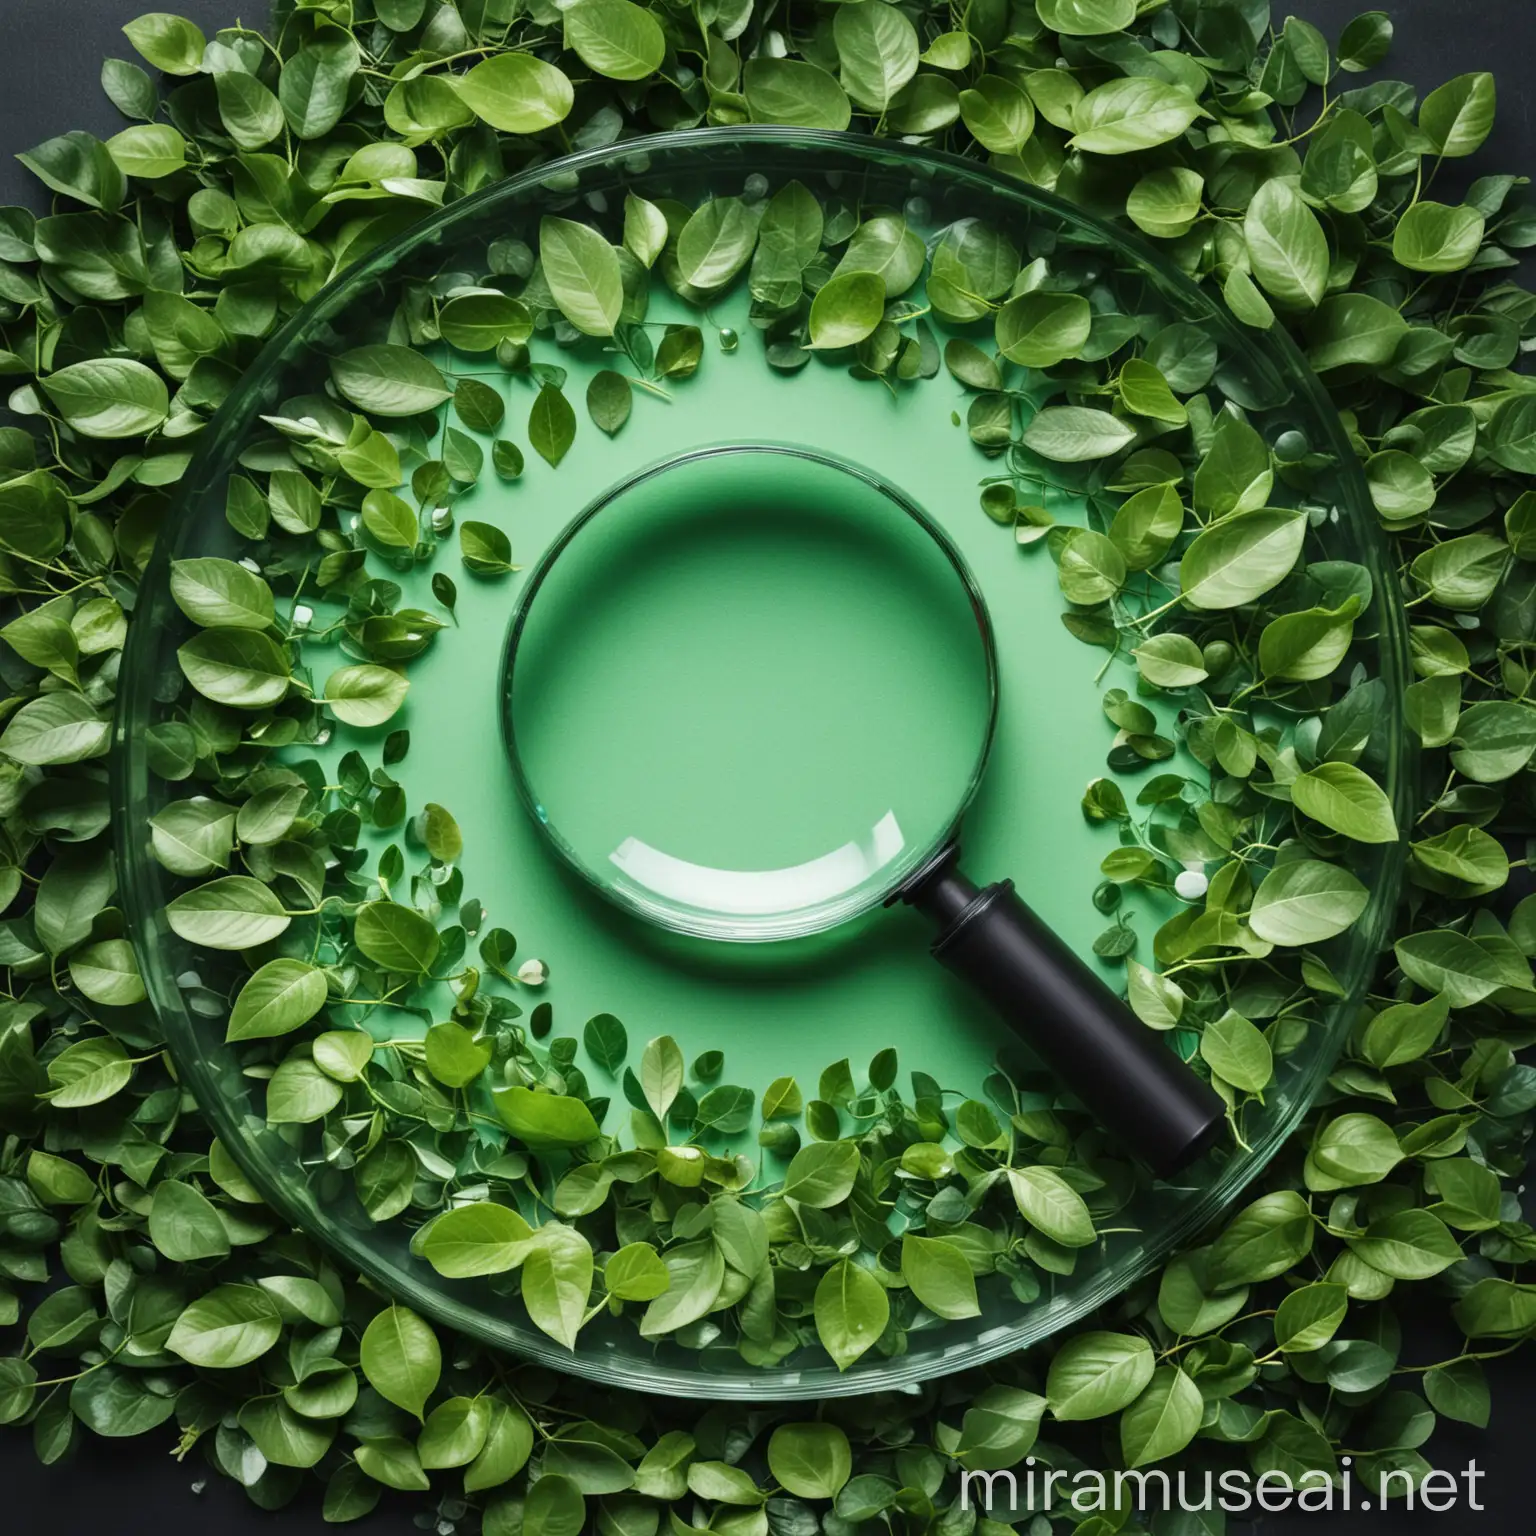 Scientific Experiment Magnifying Glass and Test Tube with Green Botanical Background